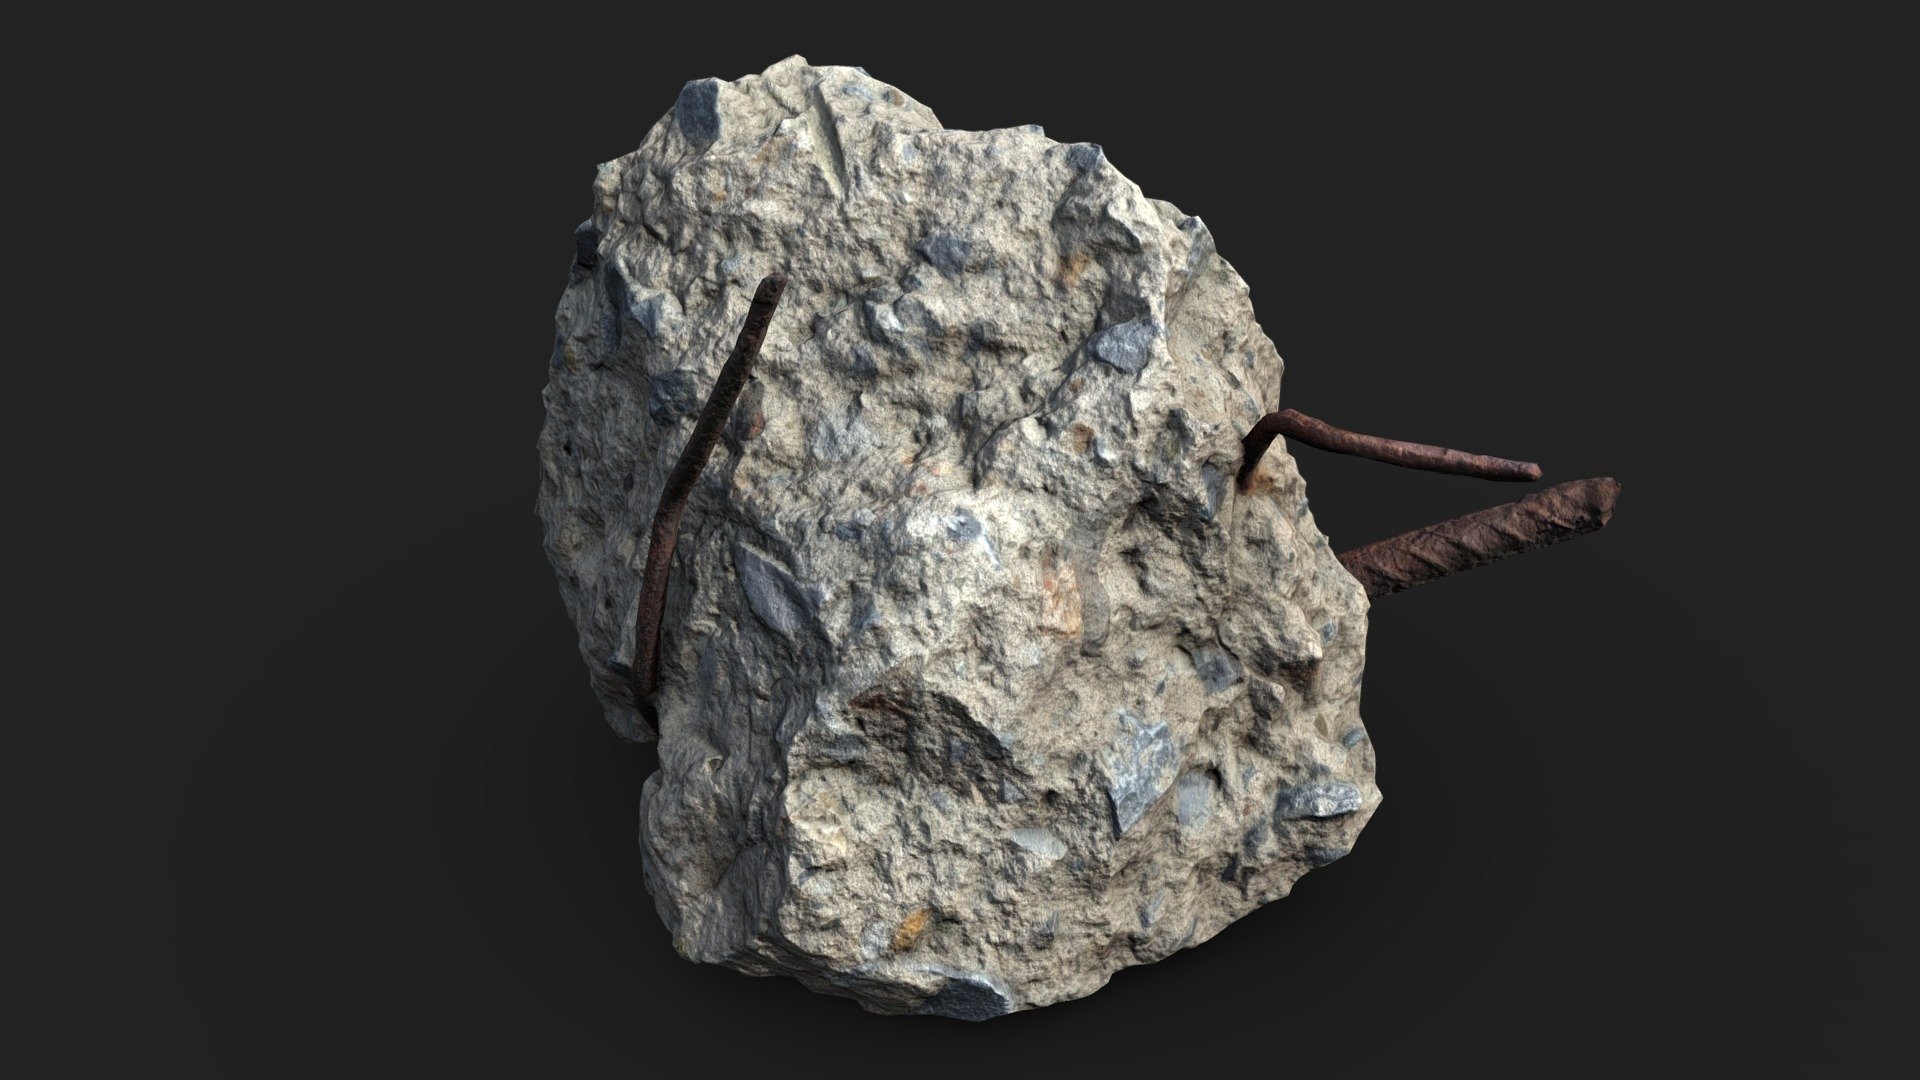 Piece of concrete with reinforcement, which is well suited for creating destroyed and abandoned scenes.

Technical specifications:

Close-up scan model

Optimized model

non-overlapping UV map

ready for animation

PBR textures 4K resolution: Normal, Roughness, Albedo, Metal, Ambient Occlusion maps

Download package includes FBX, OBJ which are applicable for 3ds Max, Maya, Unreal Engine, Unity, Blender.

Enjoy! - Piece of concrete with reinforcement scan - Buy Royalty Free 3D model by SubVis 3d model